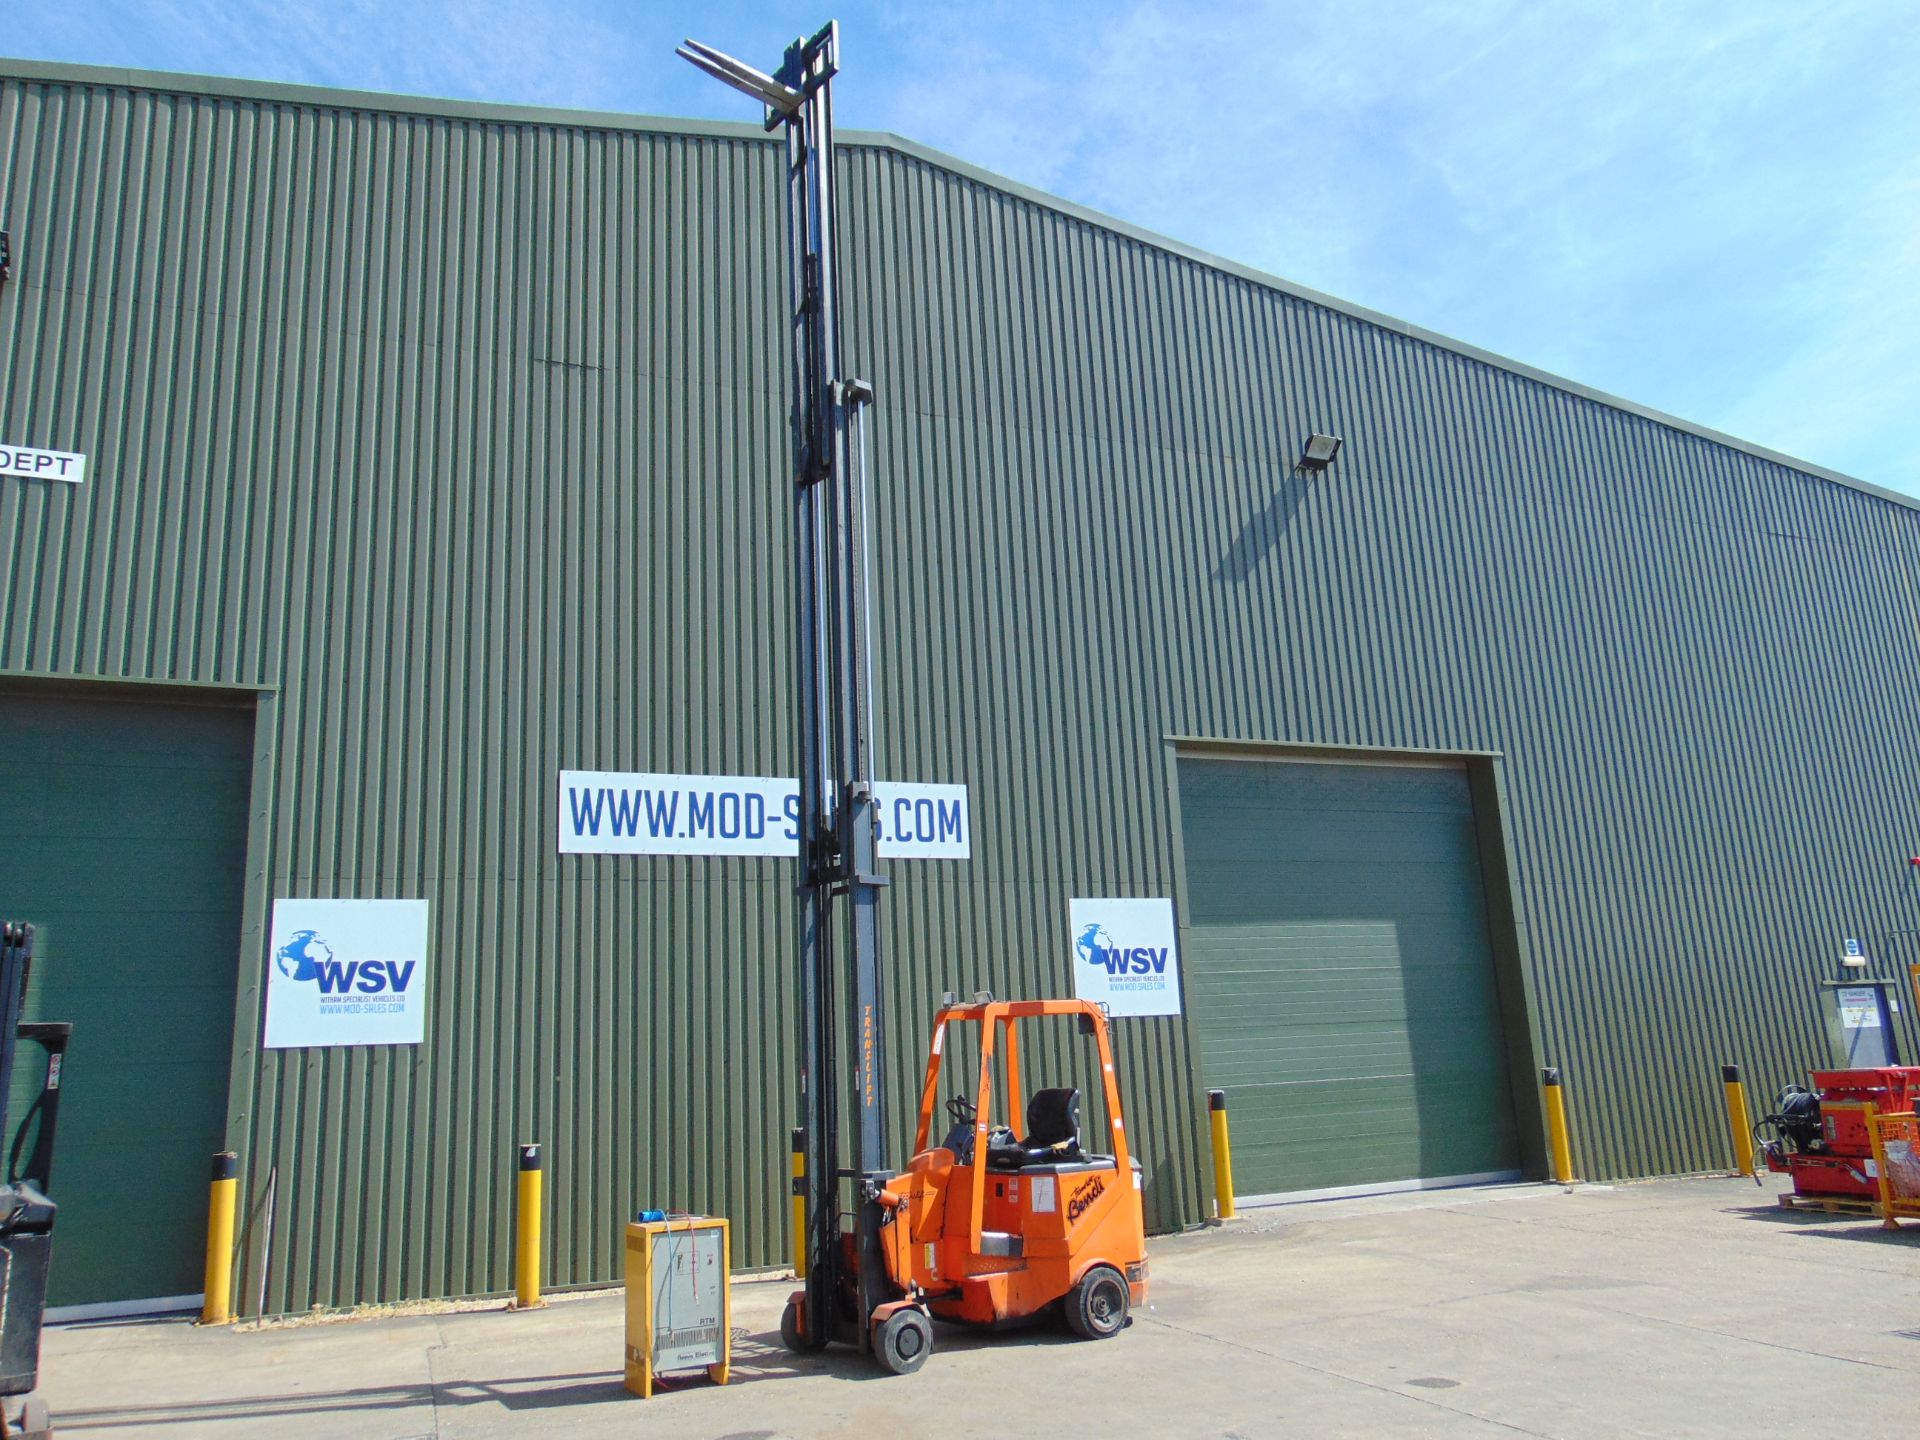 Translift Bendi Electric Reach Fork Lift Truck ONLY 264 hours! MOD Contract Fully Refurbished 2006 - Image 9 of 18